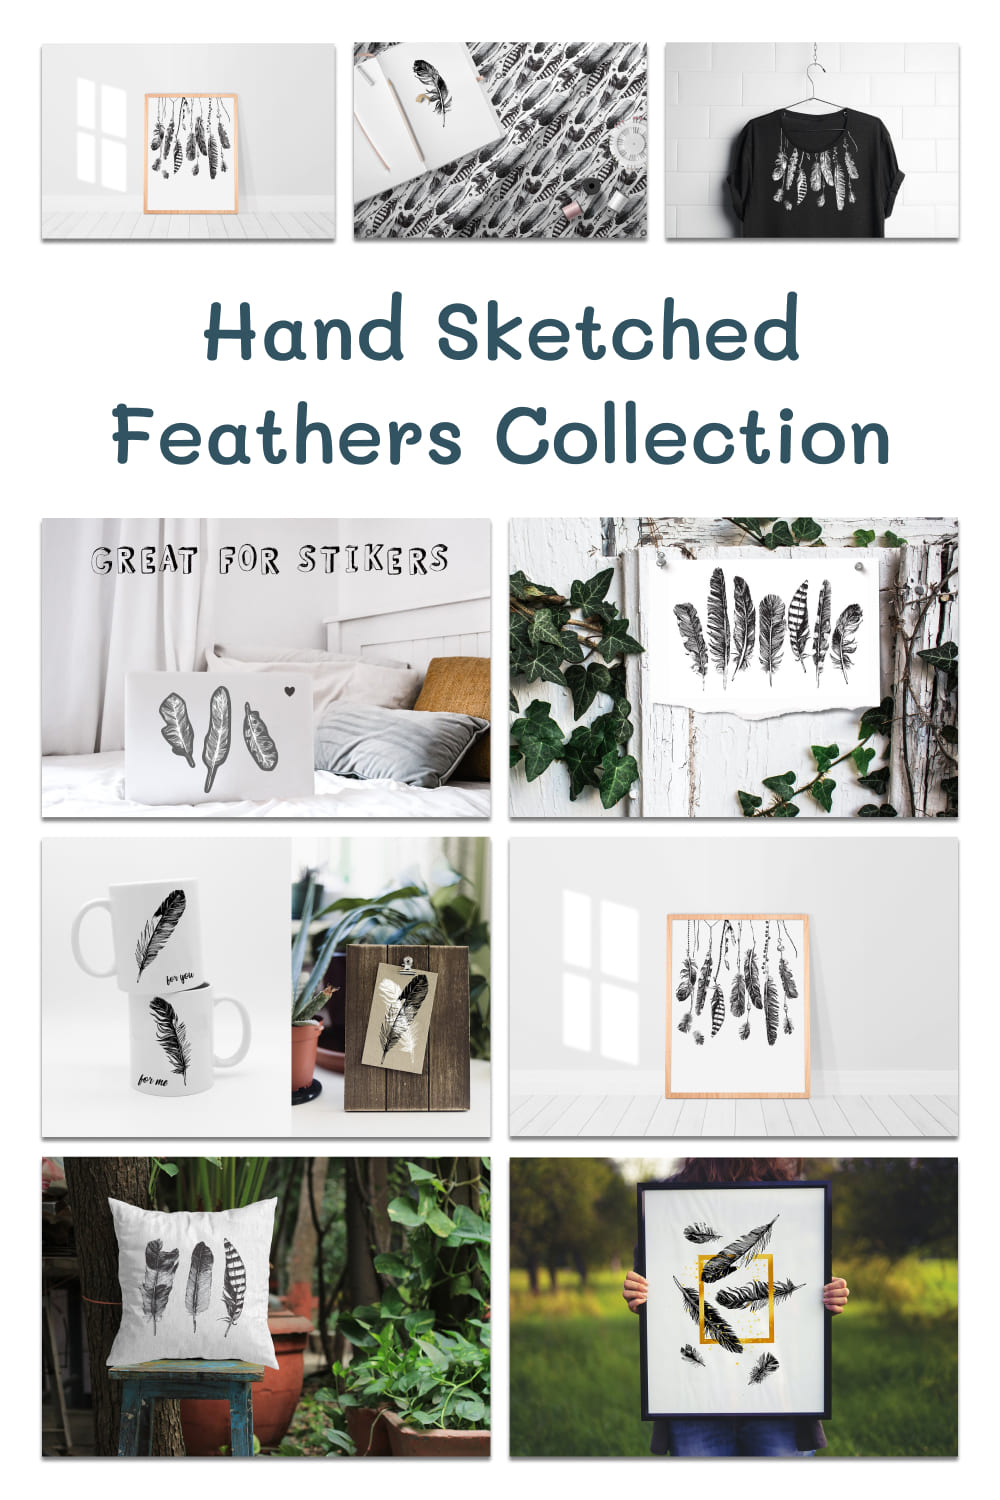 Hand Sketched Feathers Collection pinterest image.